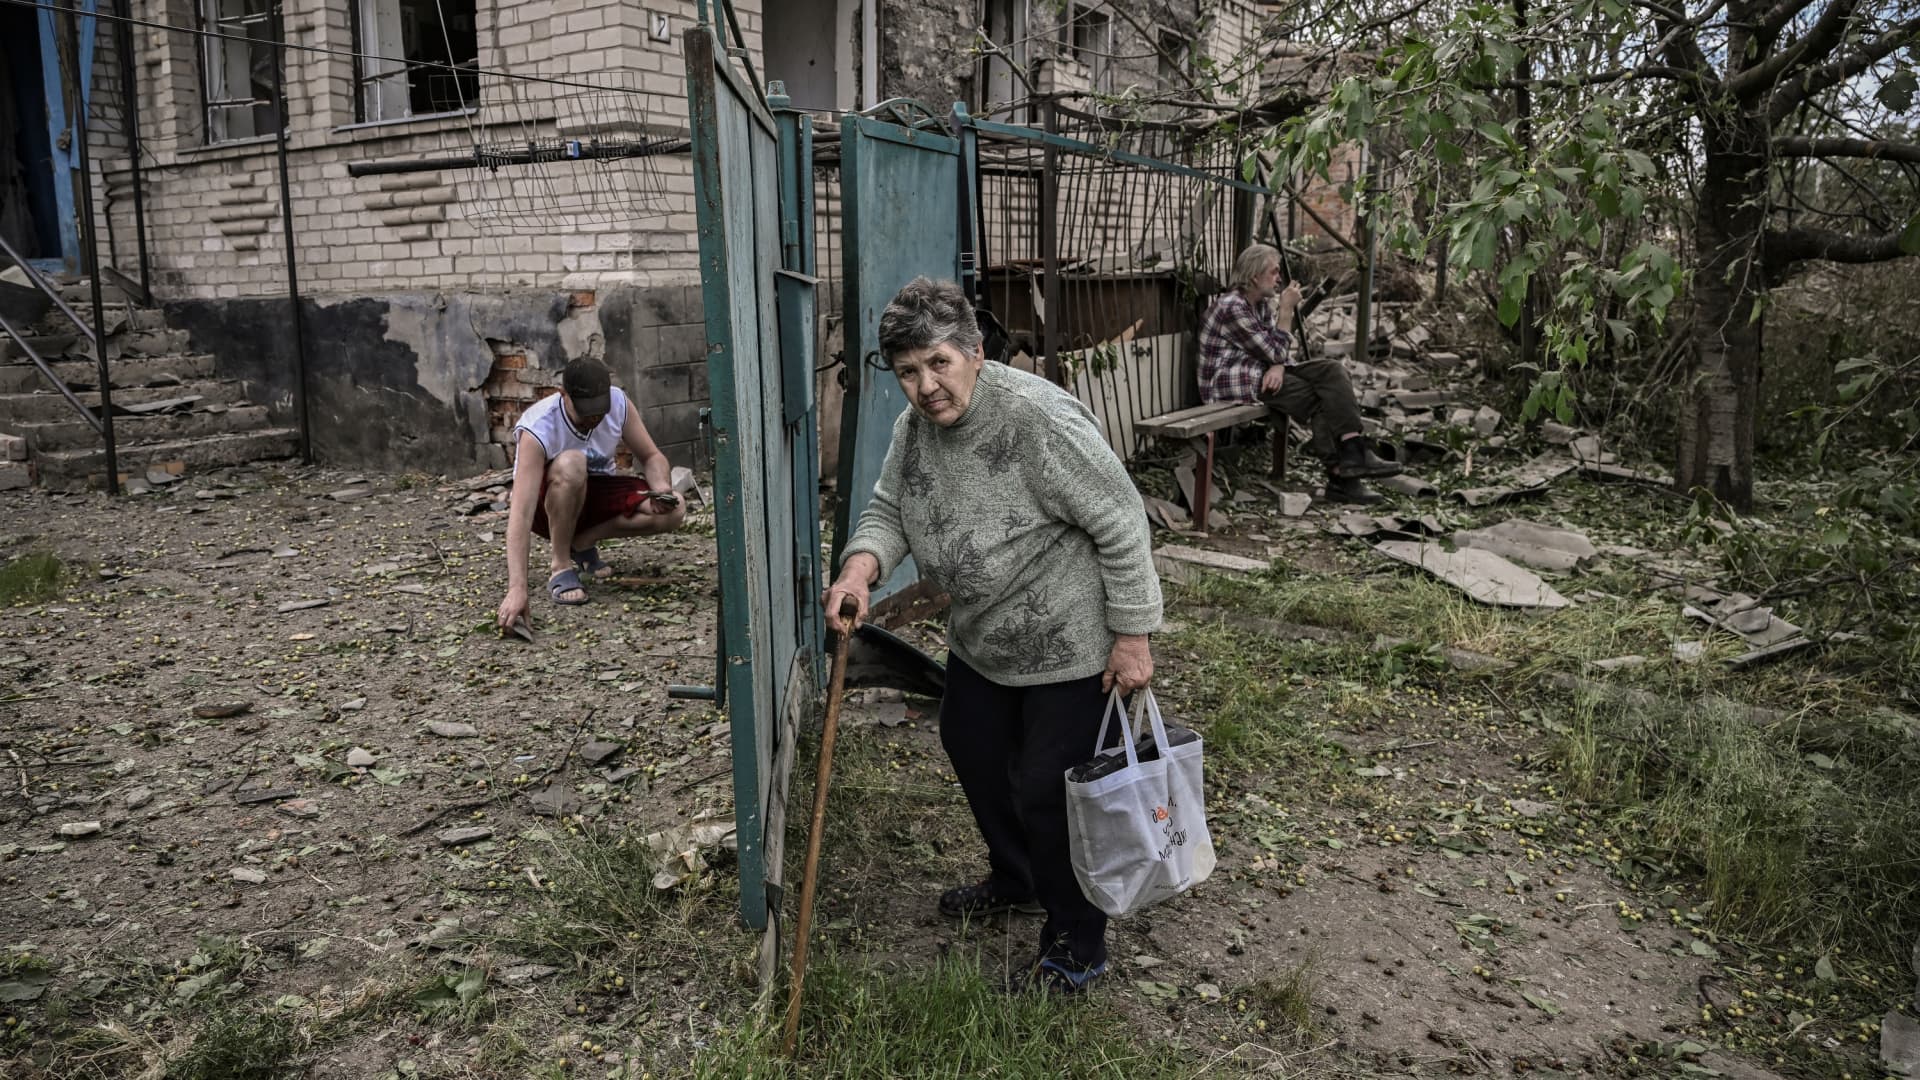 A man sits and smokes a cigarette in front of his destroyed house after a missile strike, which killed an old woman, in the city of Druzhkivka (also written Druzhkovka) in the eastern Ukrainian region of Donbas on June 5, 2022.